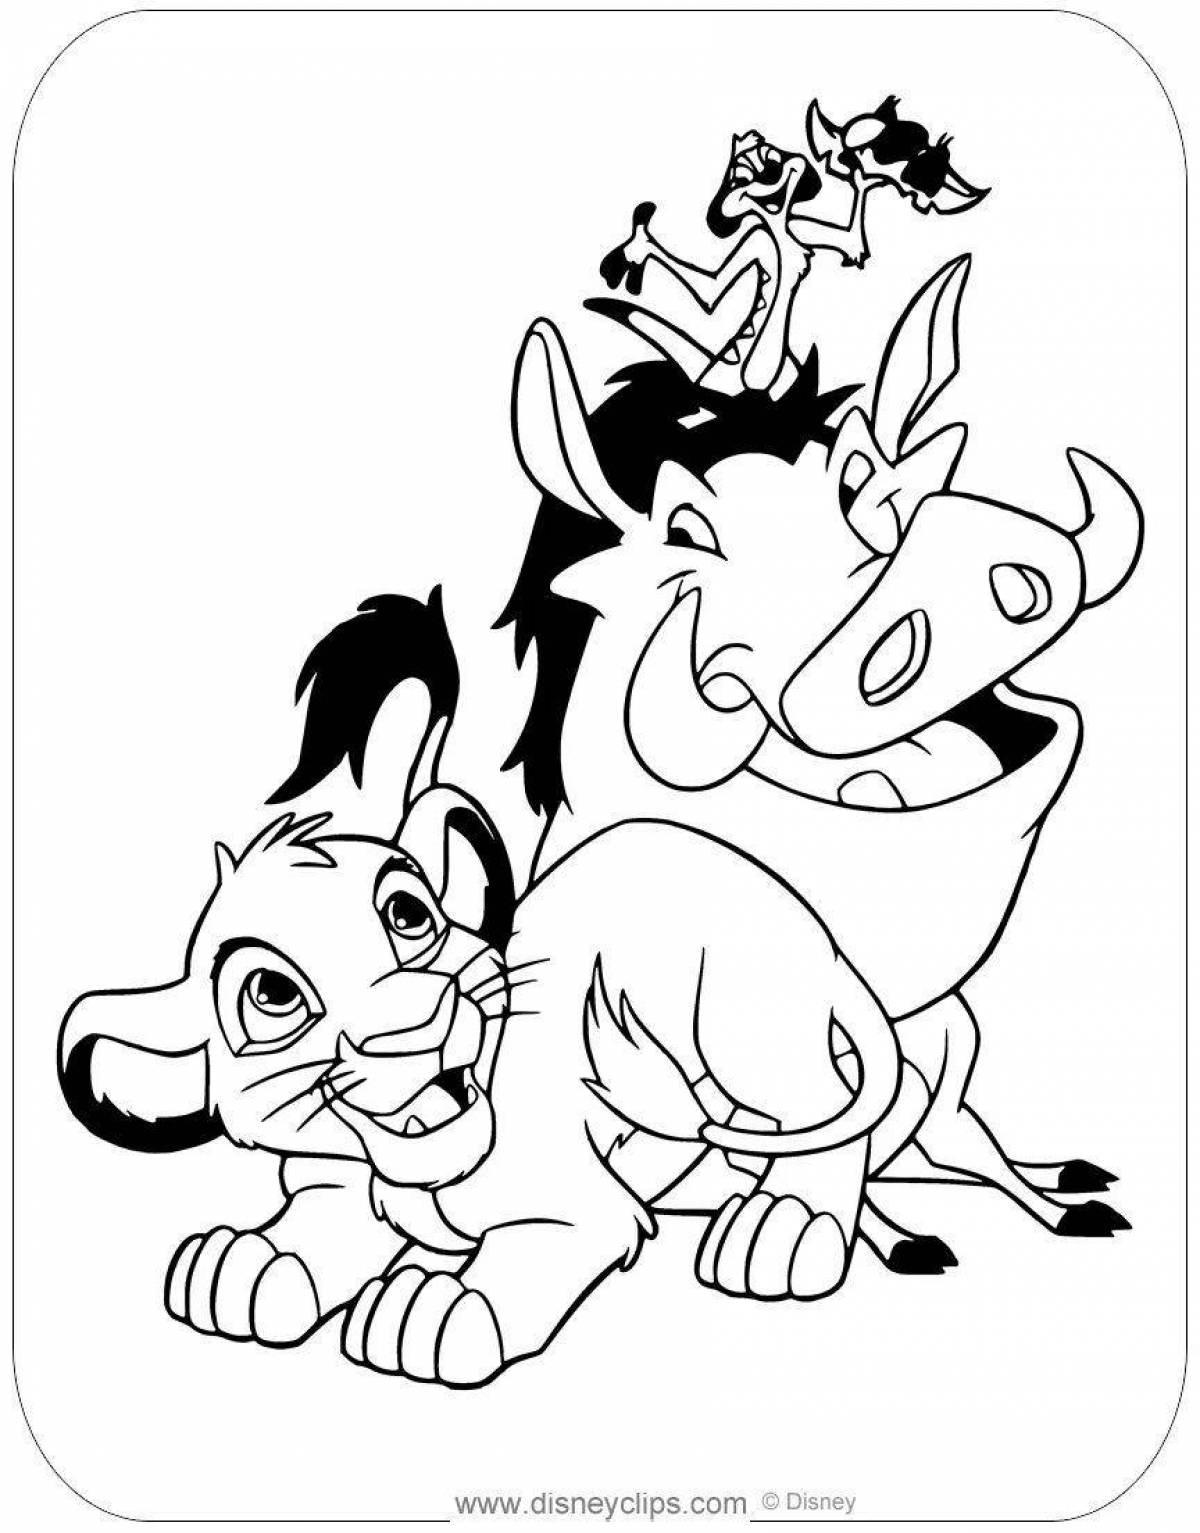 Regal timon and pumbaa coloring page